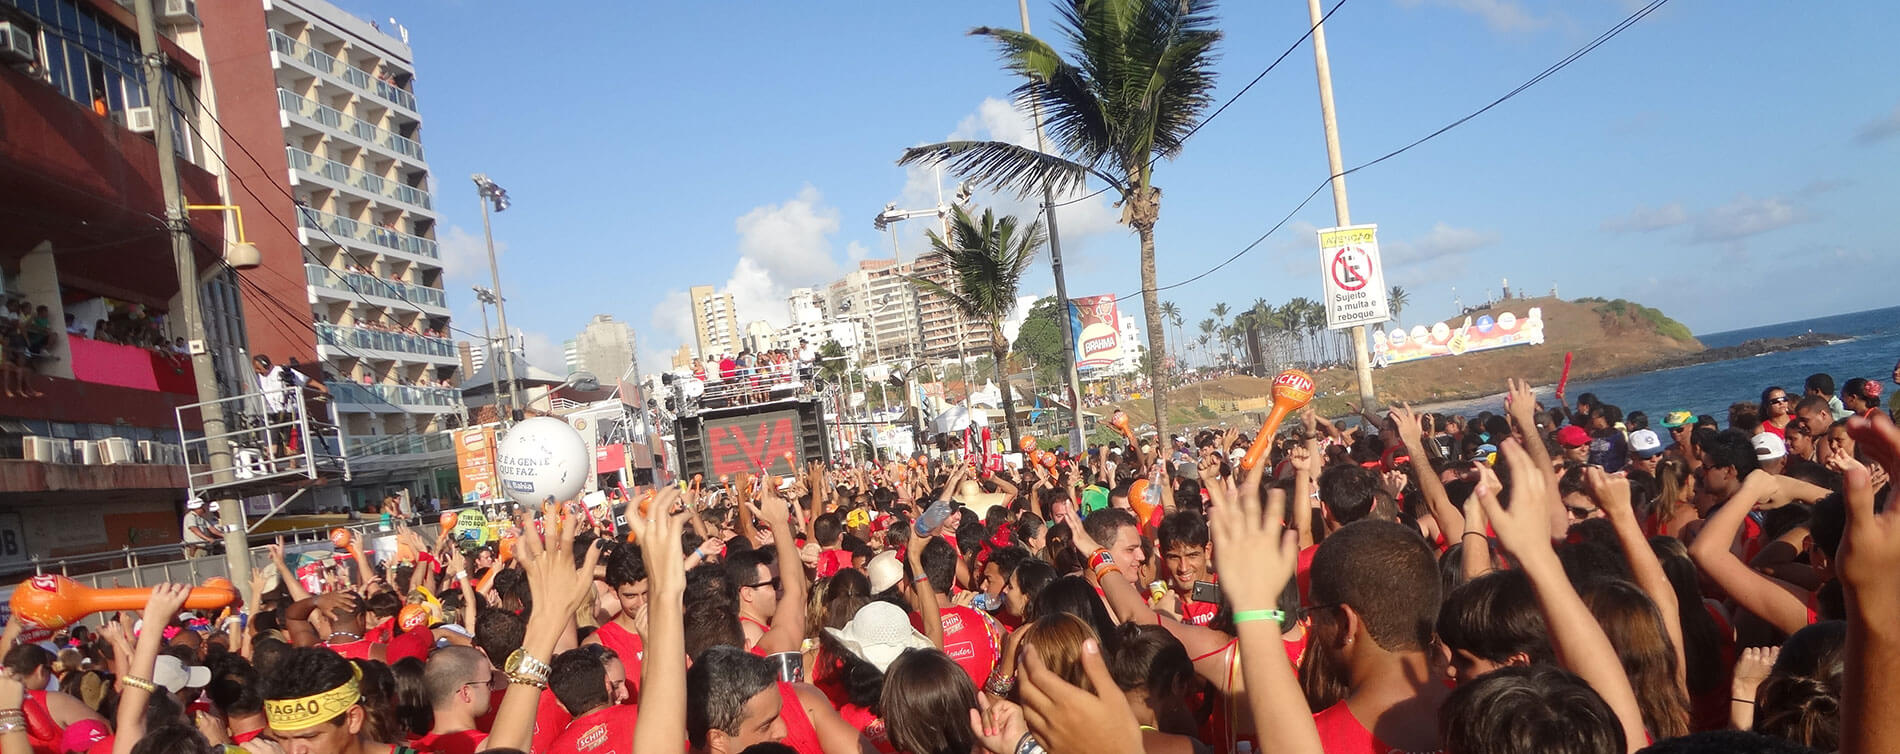 Upcoming Carnival Event in Salvador